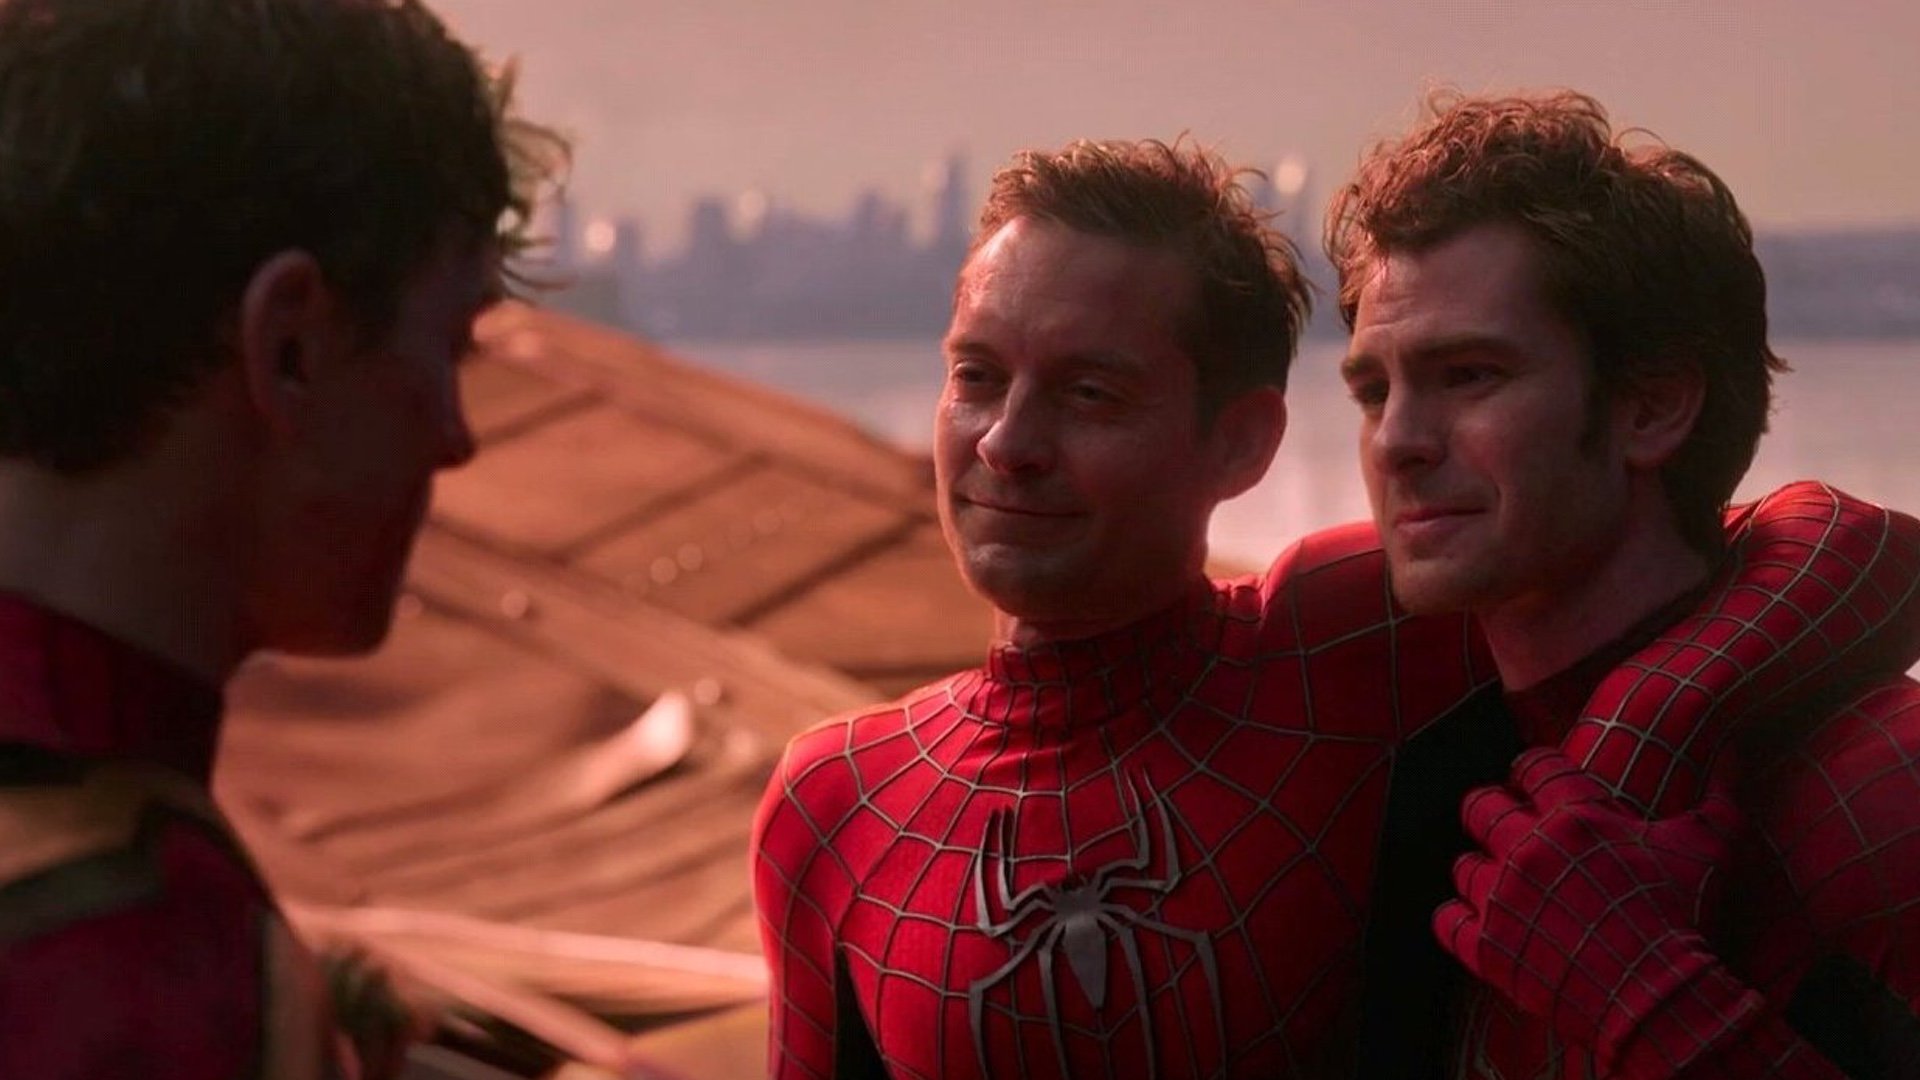 Sony and Kevin Feige Reportedly At Odds With Spider-Man 4 Plans